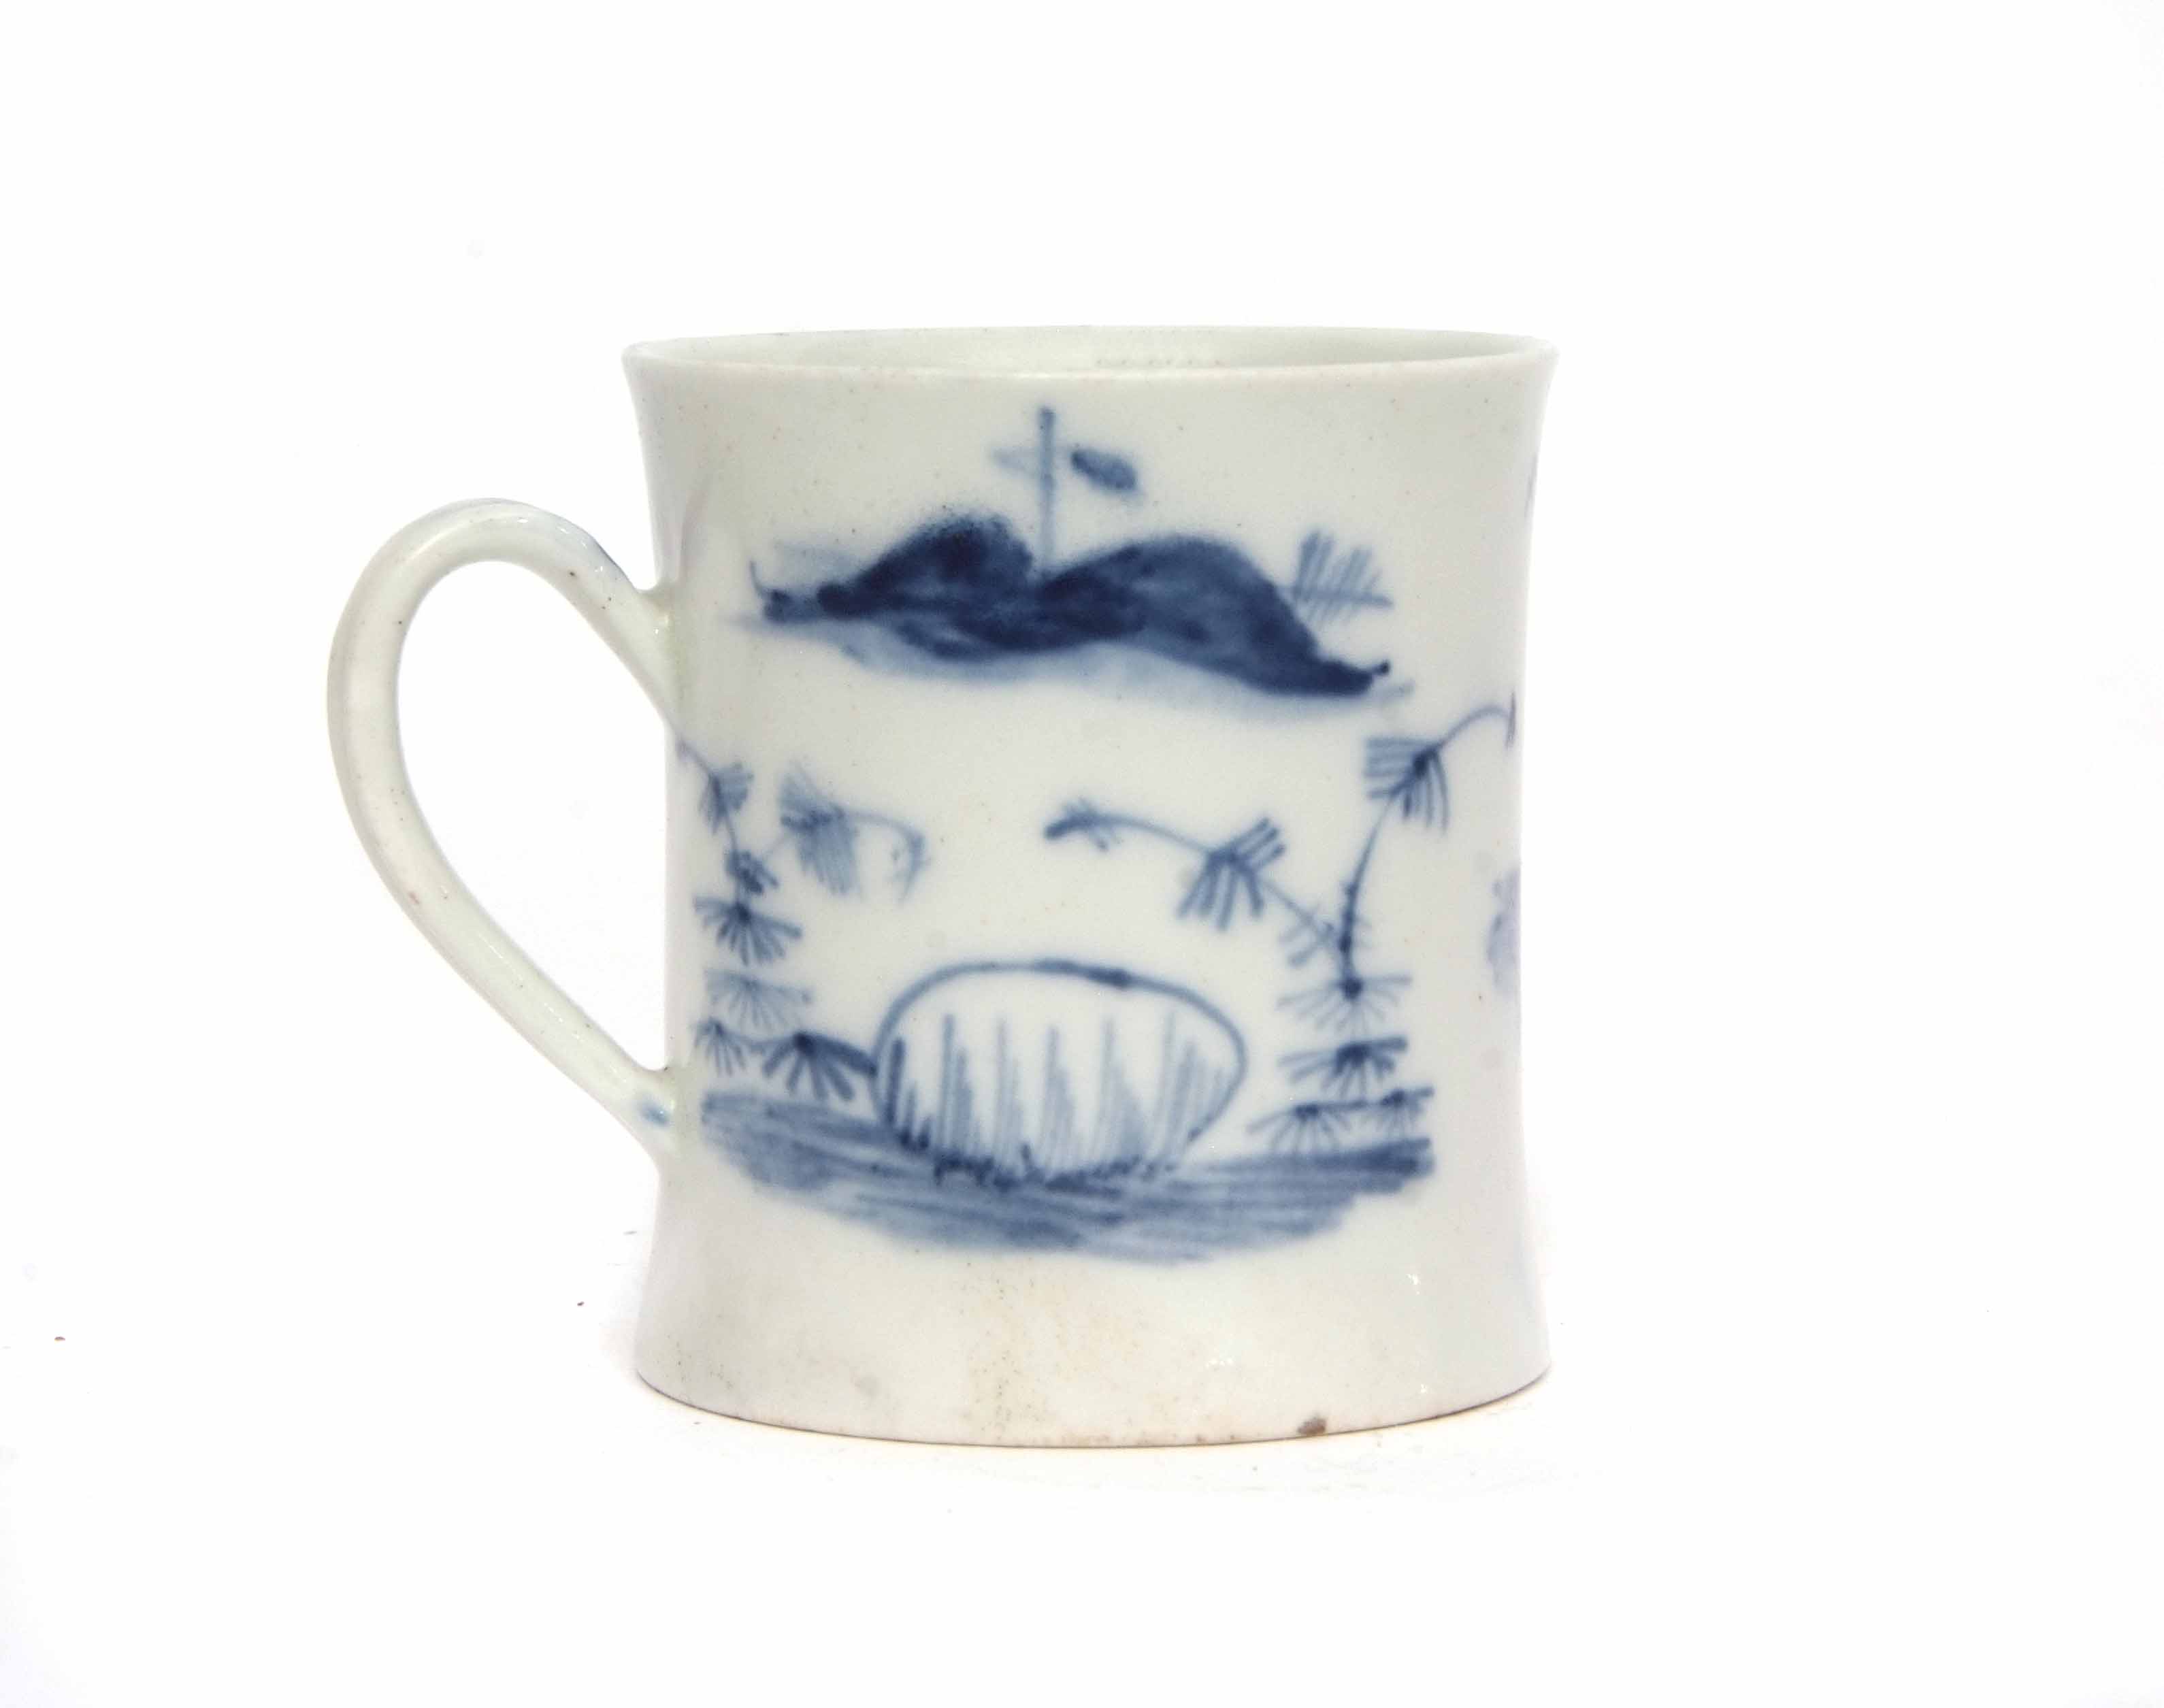 18th century Worcester coffee can or small mug circa 1755, decorated in tones of underglaze blue - Image 2 of 4